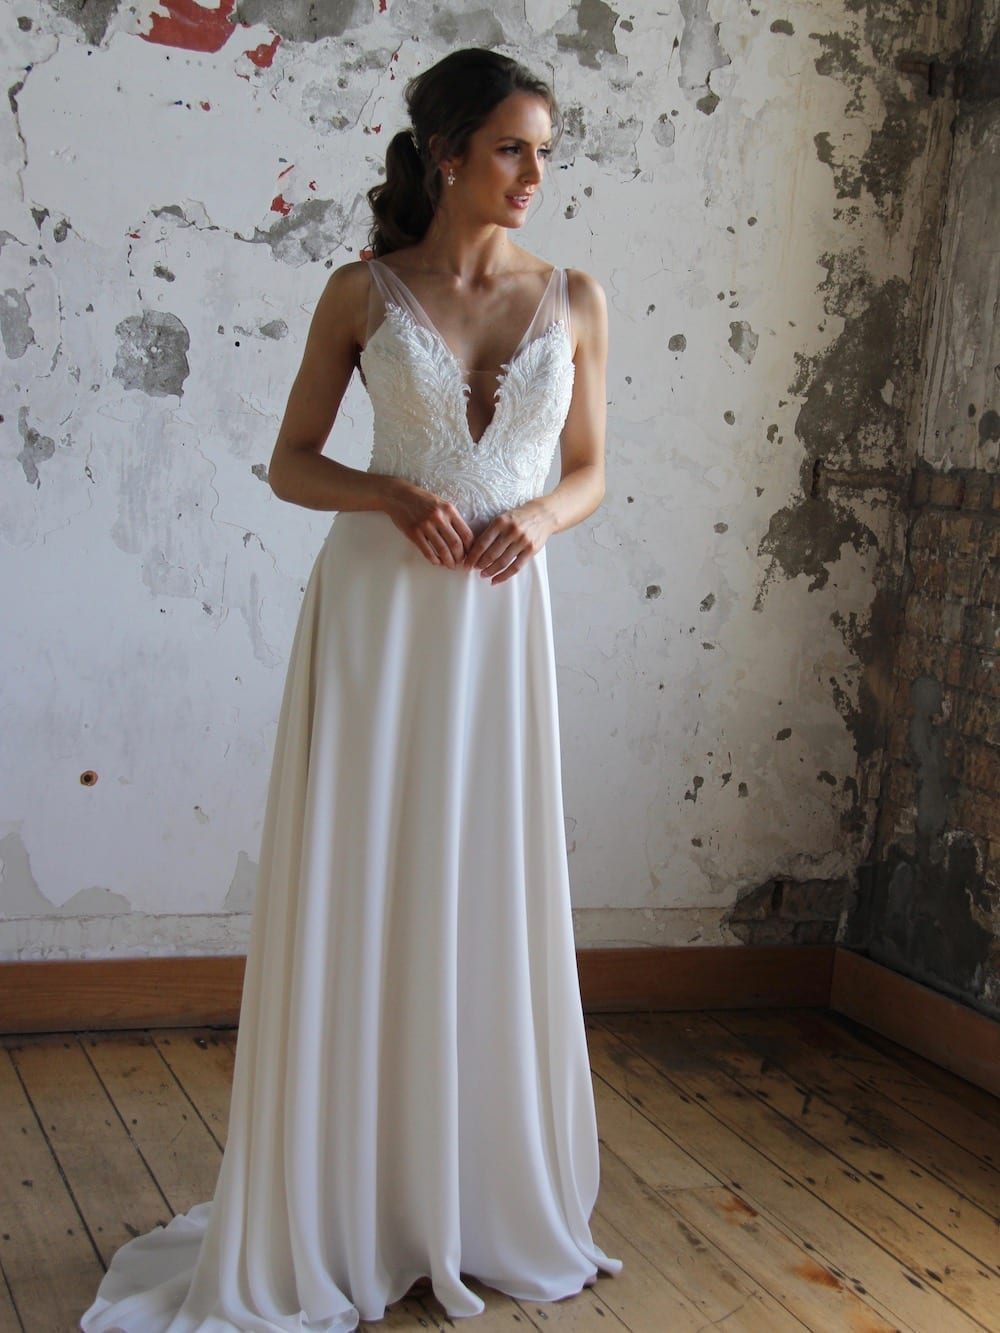 Female model wearing Vinka Design Modern Muse Wedding Dress. In chic warehouse the front detail of a gown with beaded lace and tulle bodice and bridal crepe skirt with train.